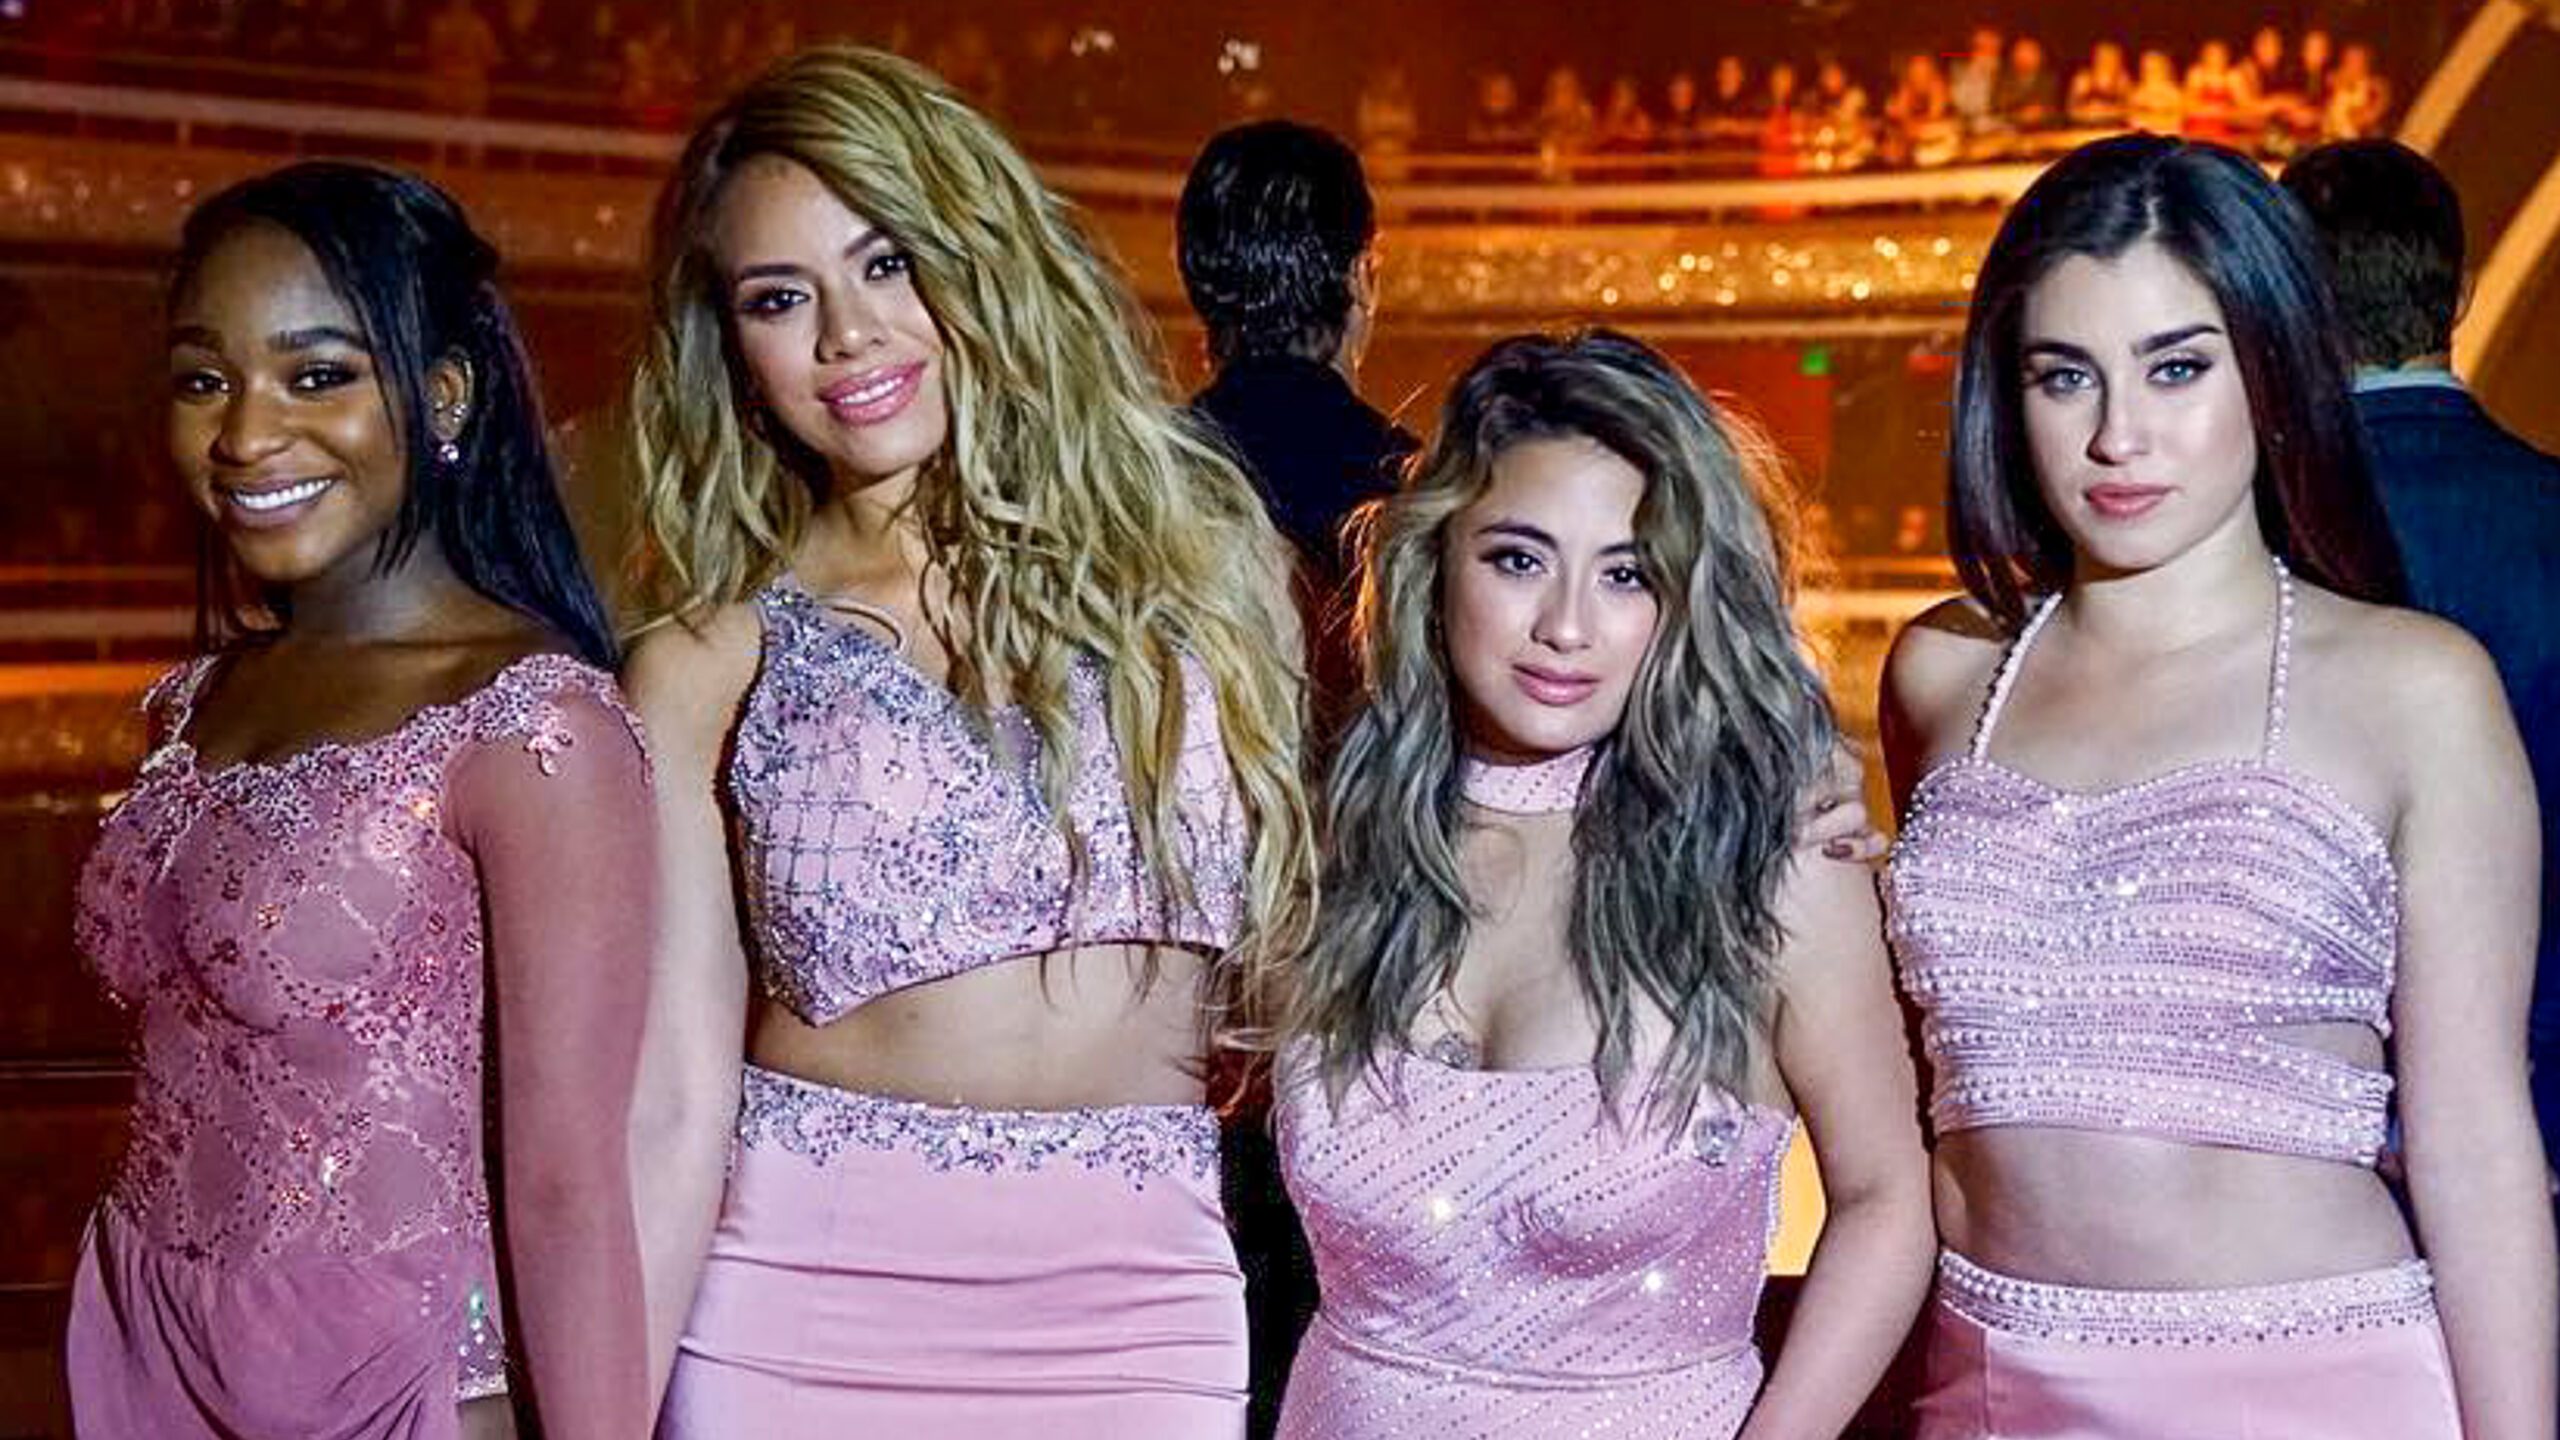 LISTEN: Fifth Harmony drops first song without Camila Cabello